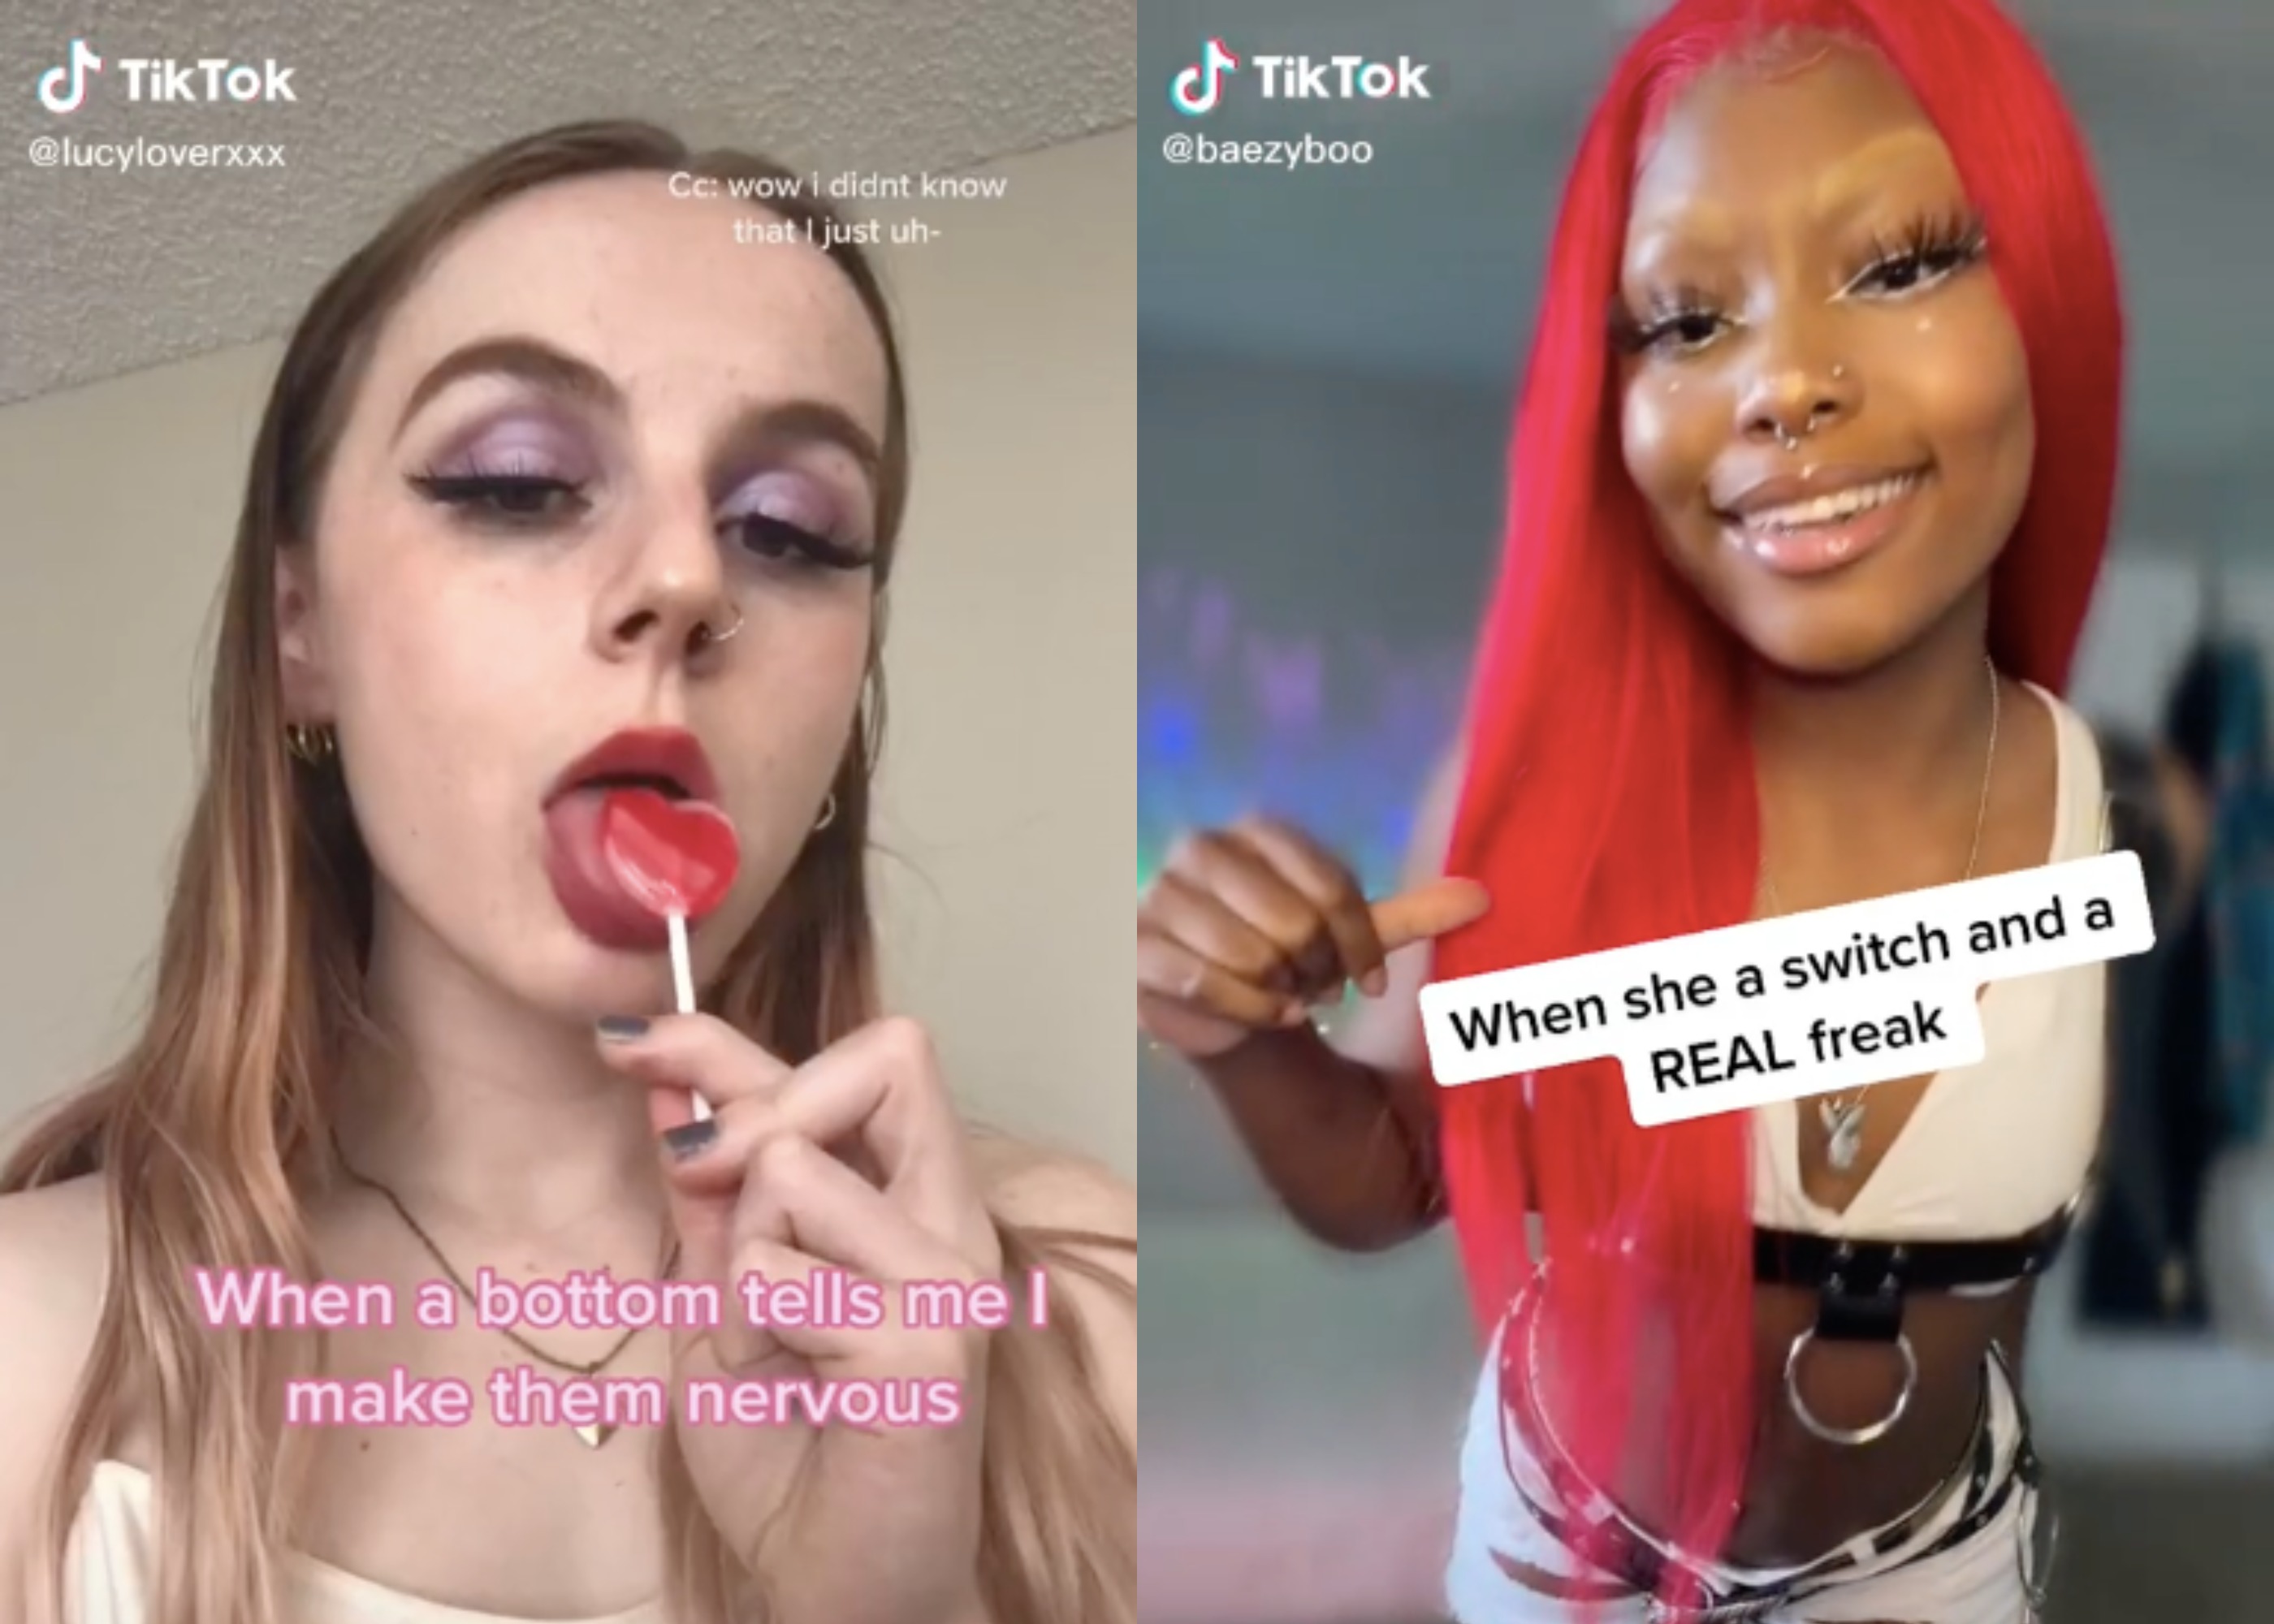 On TikTok, BDSM, fetish and kink content is thriving